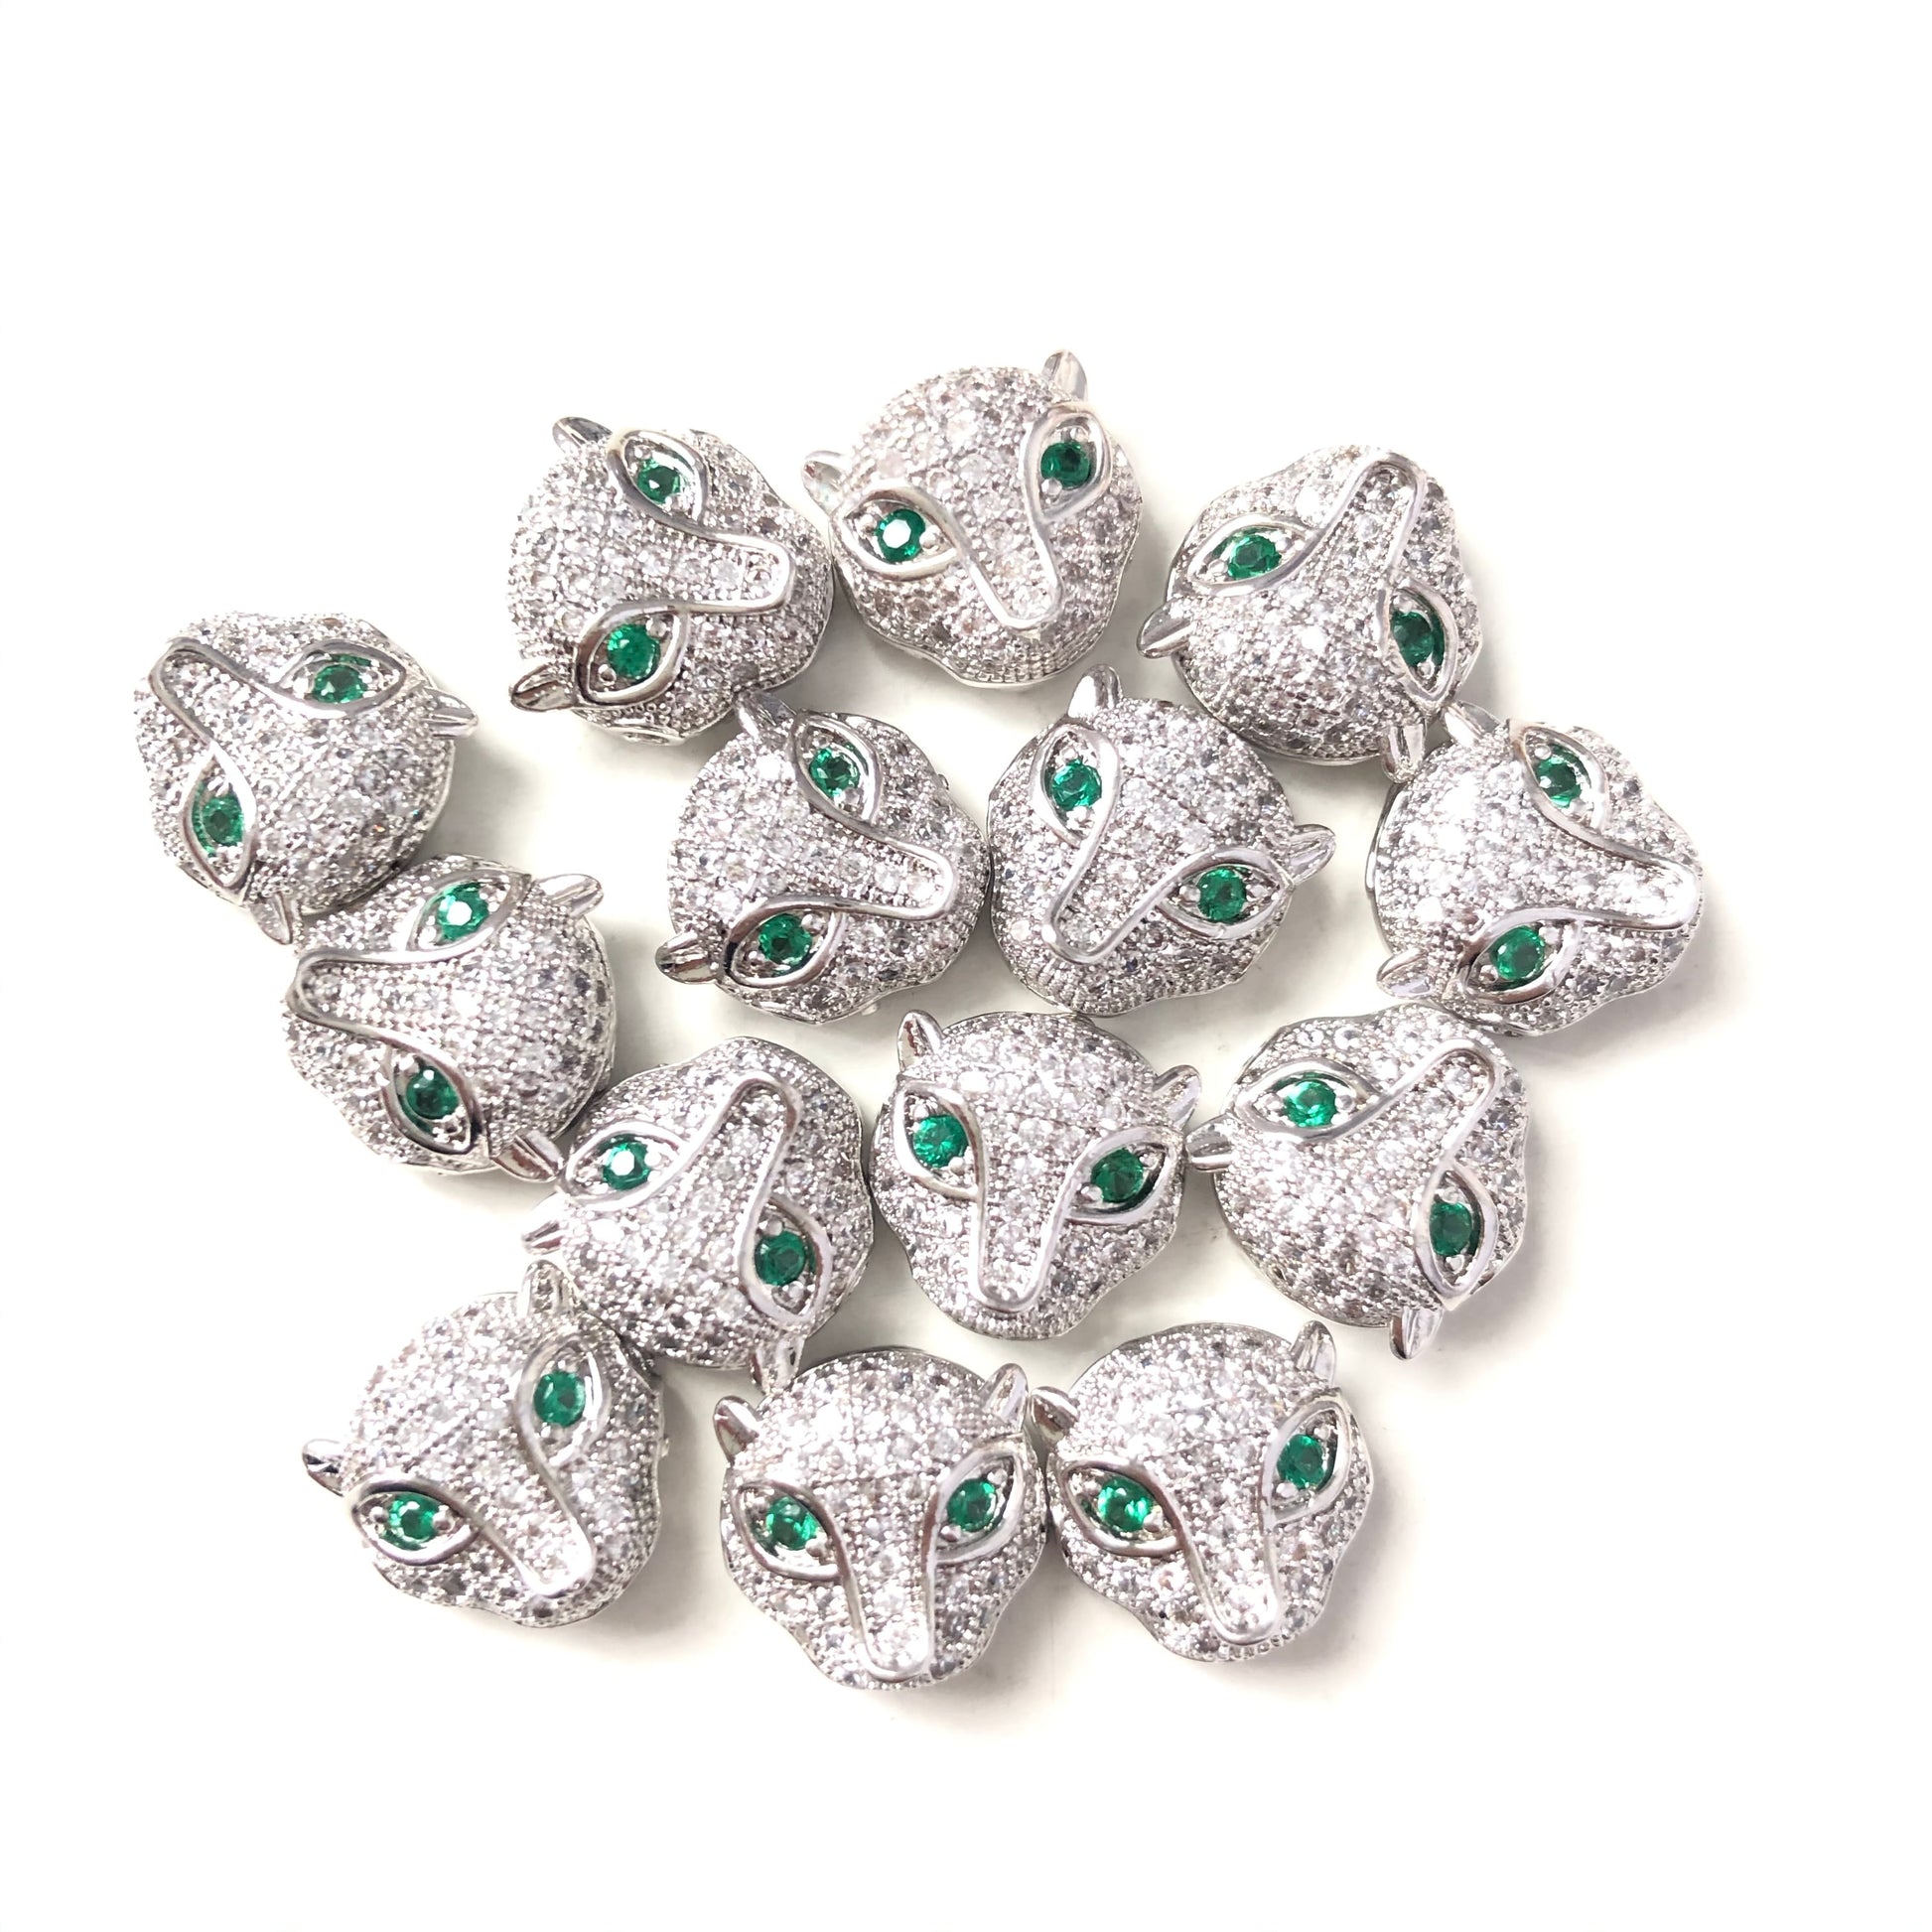 20pcs/lot Clear CZ Paved Panther Head Spacers Silver CZ Paved Spacers Animal Spacers Charms Beads Beyond